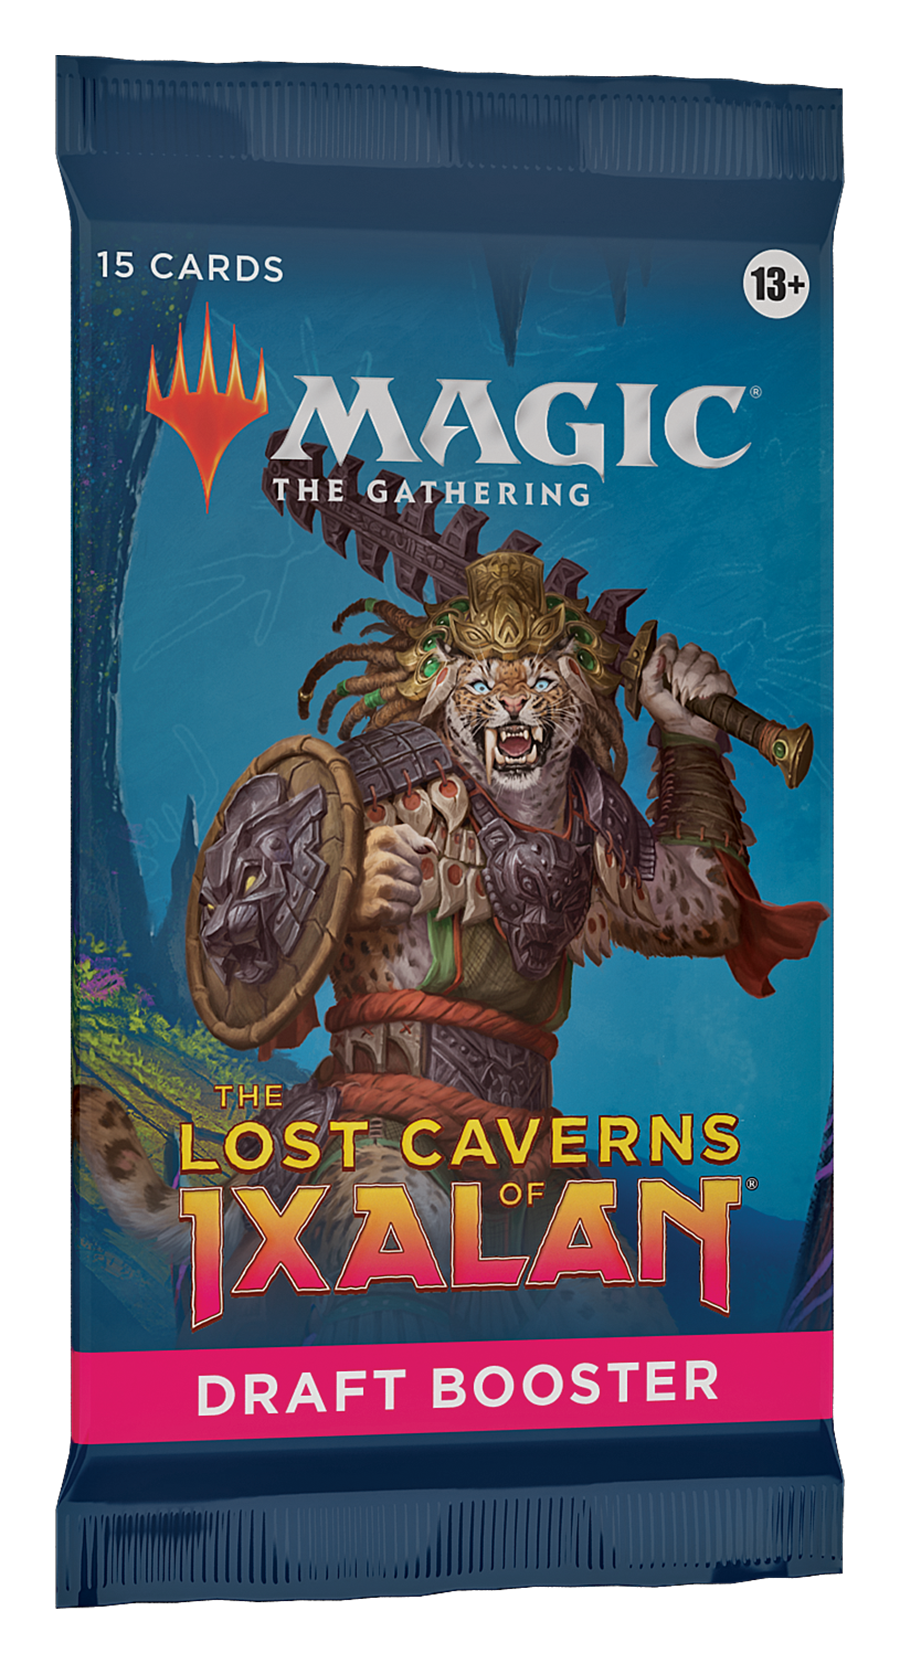 Magic: The Gathering The Lost Caverns of Ixalan Draft Booster